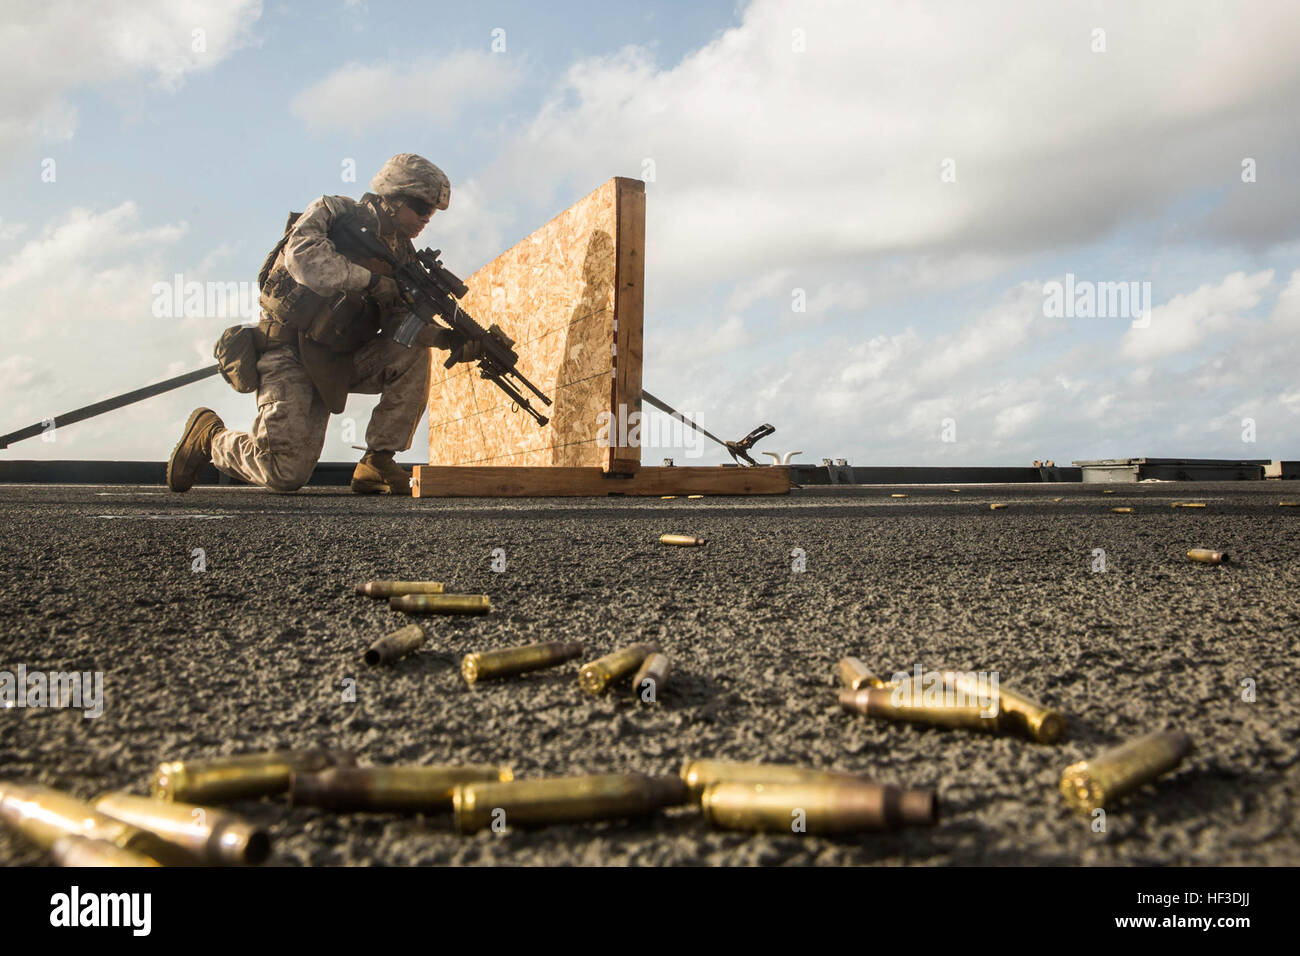 U.S. Marine Lance Cpl. Jose Garcia moves to his next shooting position during a short-range marksmanship qualification course aboard the USS Rushmore (LSD 47) at sea in the Indian Ocean, June 18, 2015. Garcia is a rifleman with Kilo Company, Battalion Landing Team 3rd Battalion, 1st Marine Regiment, 15th Marine Expeditionary Unit. The marksmanship course improves Marine’s combat shooting tactics and prepares them for future operations while deployed with the 15th MEU. (U.S. Marine Corps photo by Sgt. Emmanuel Ramos/Released) U.S. Marines sharpen combat skills at sea 150618-M-ST621-559 Stock Photo